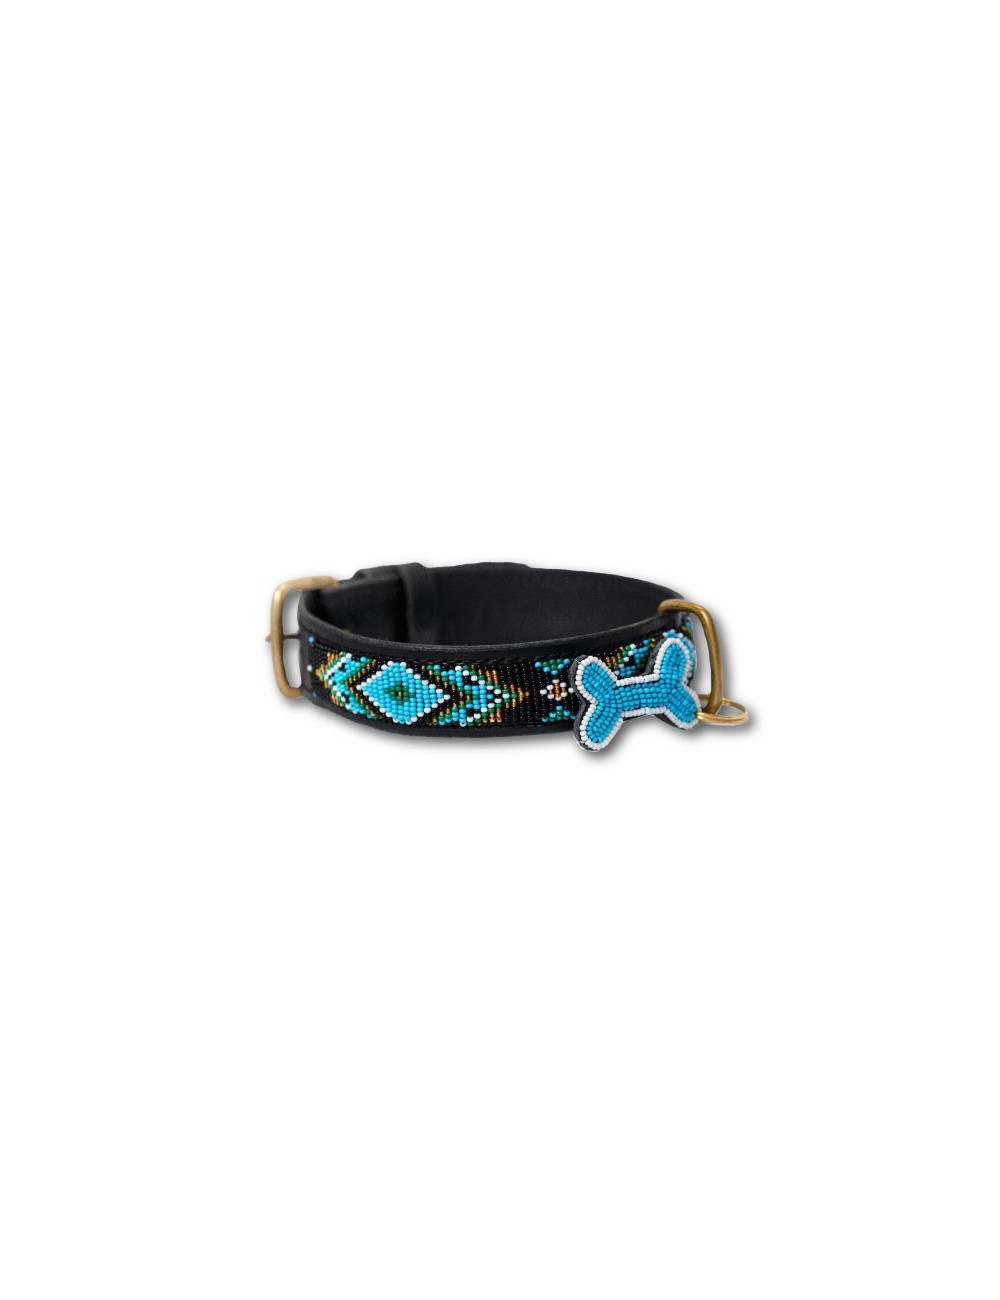 Collier chien Terese turquoise KAMPUNI